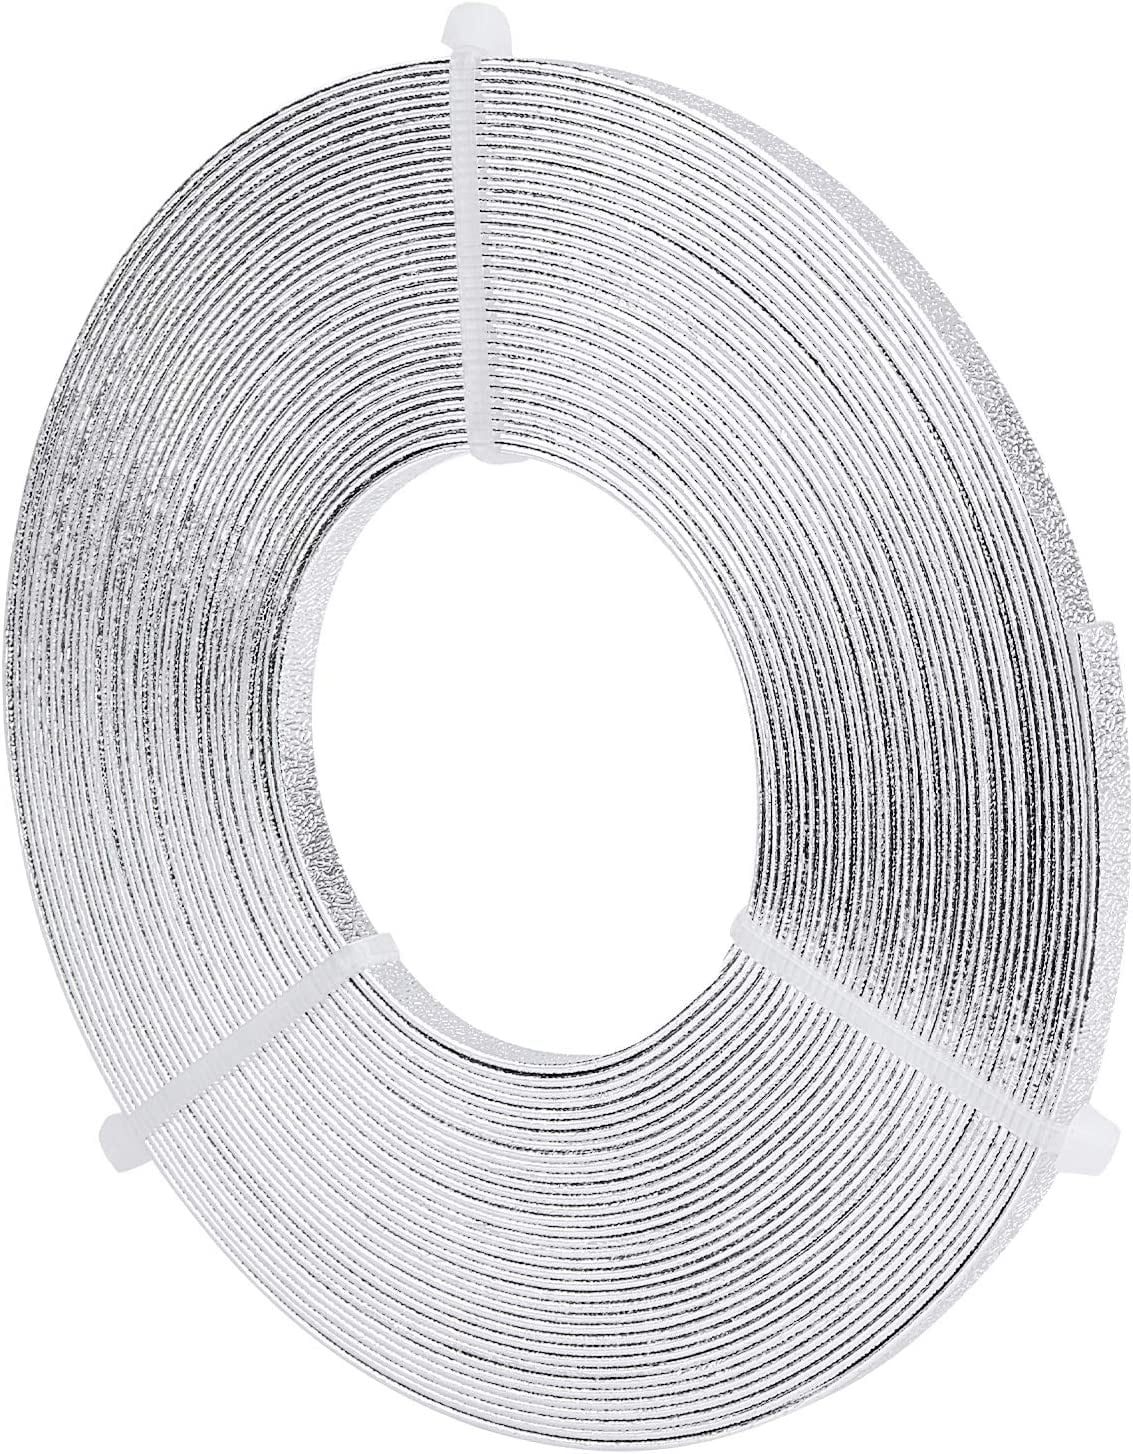 6 Spools 39ft Flat Aluminum Wire 5mm Metal Jewelry Craft Wire Bendable &  Flexible Beading